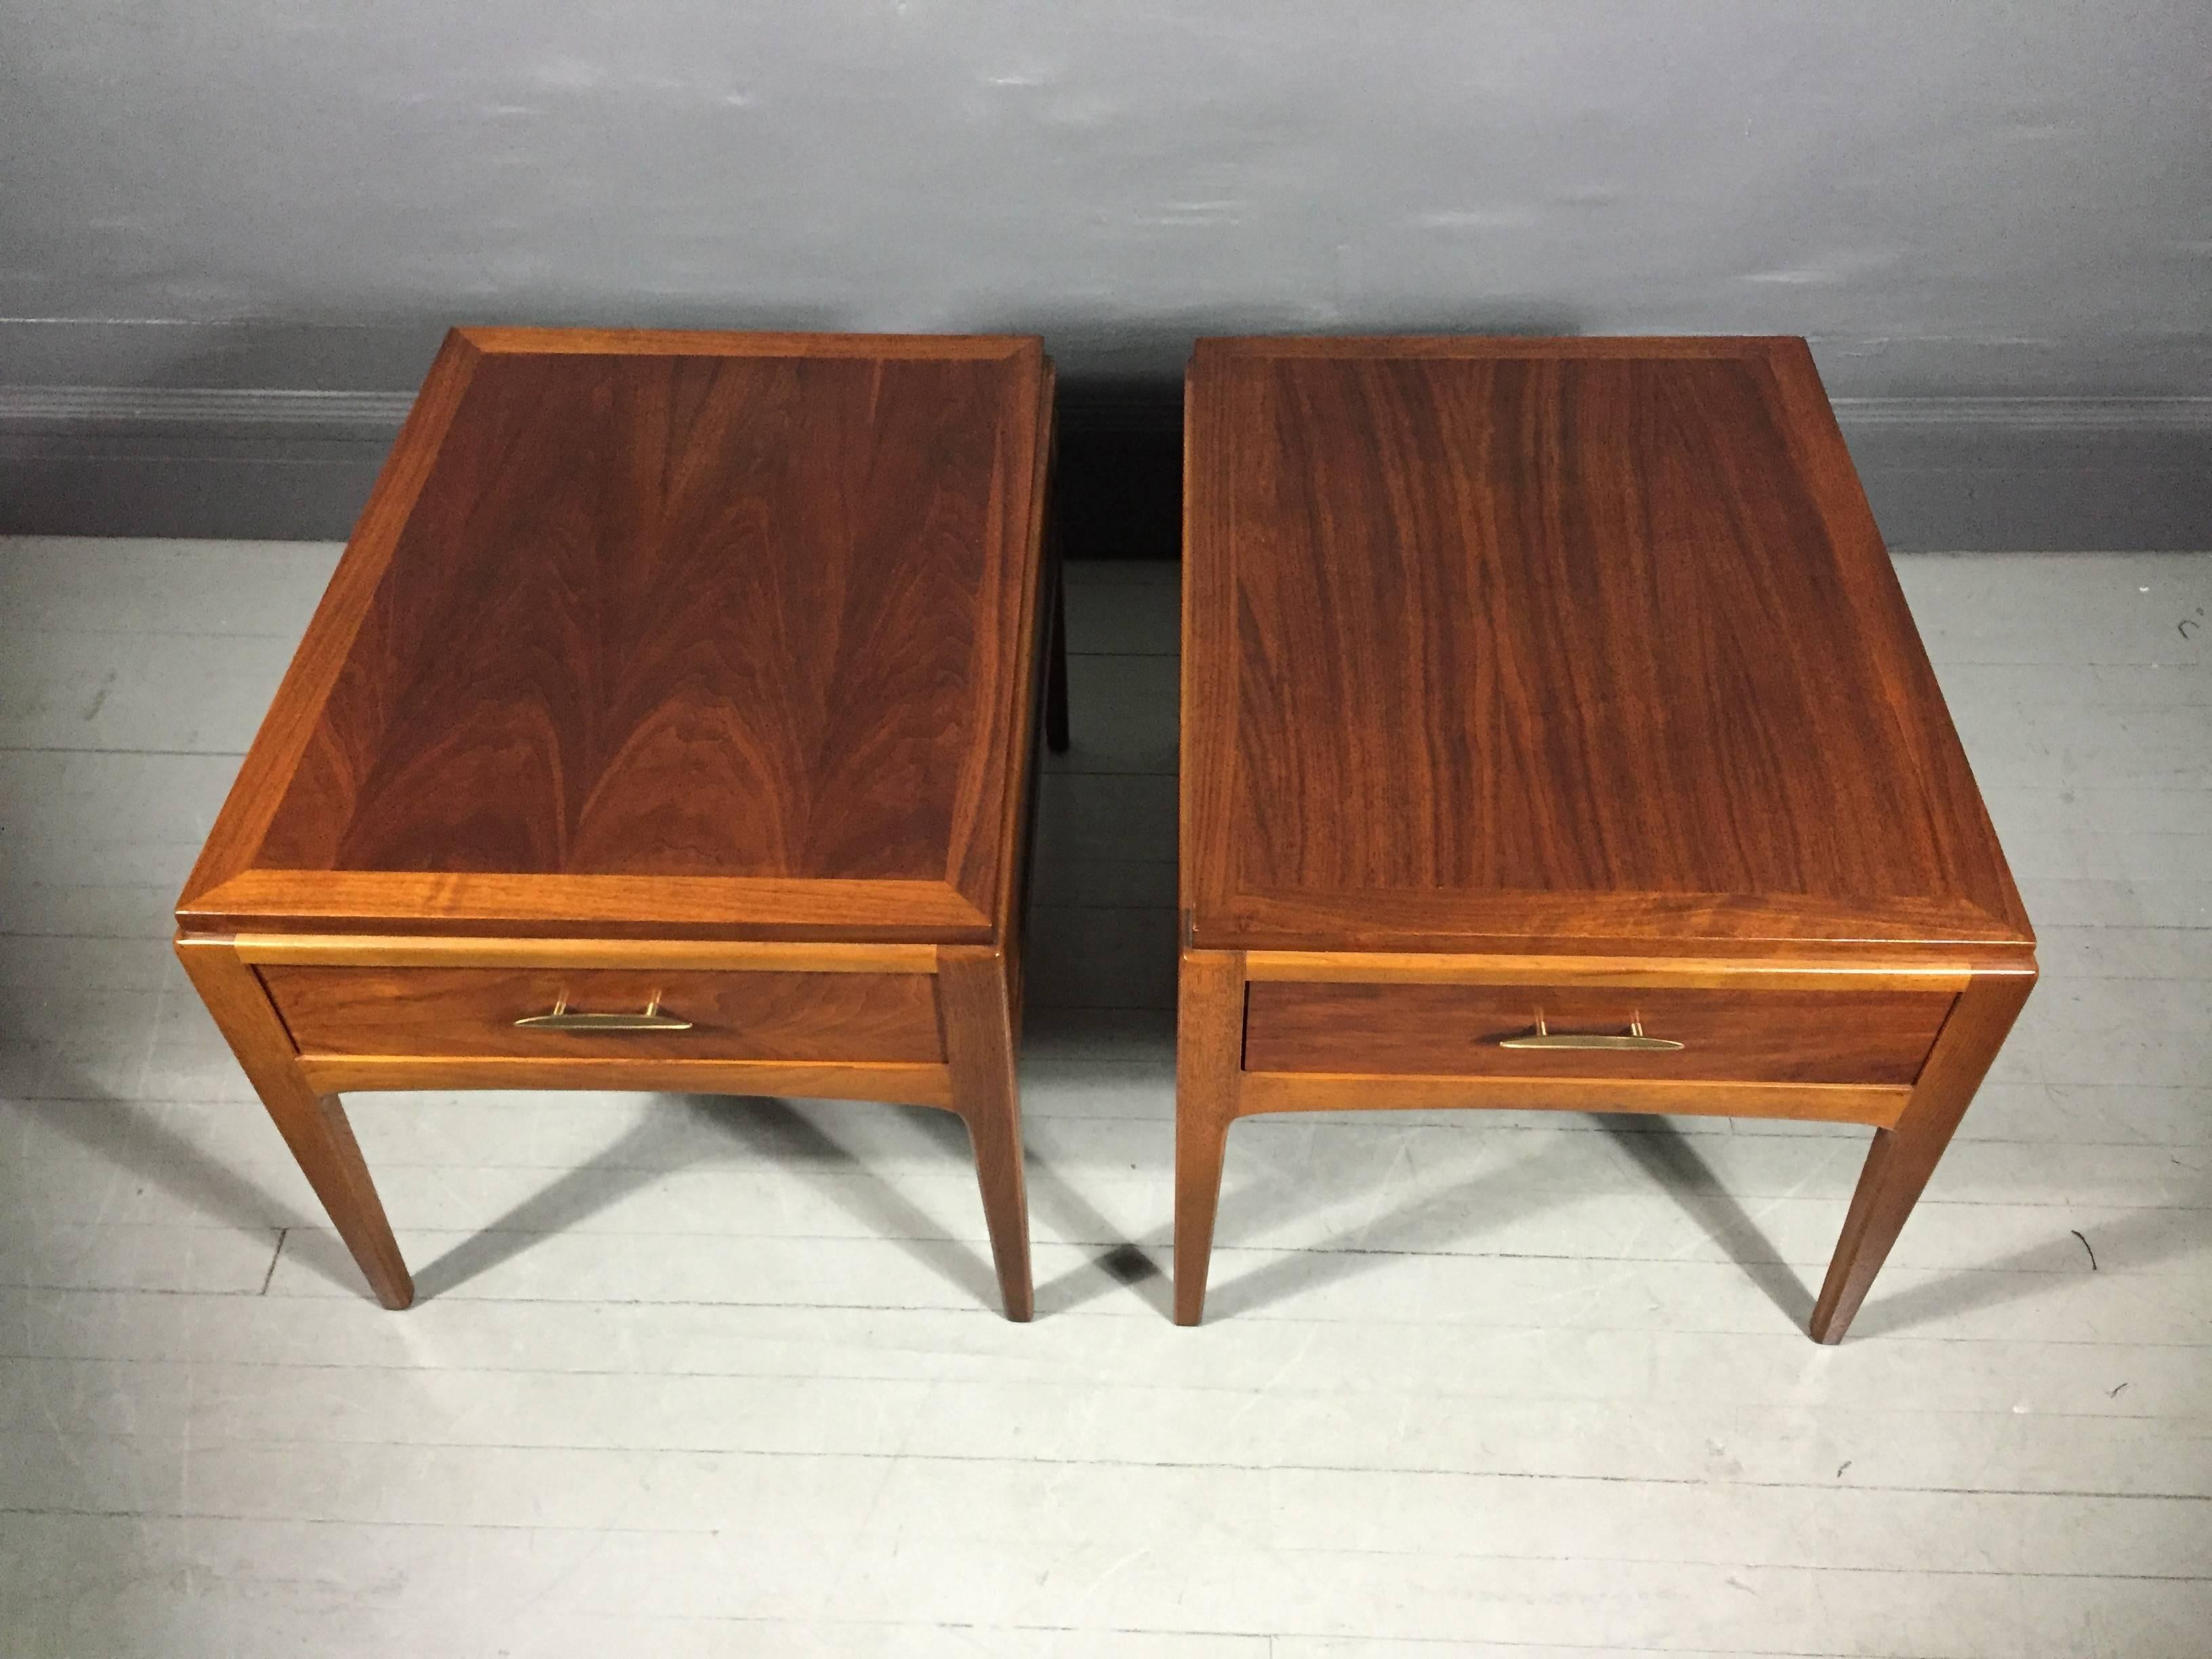 Exceptional refinished-condition pair of end tables in lightly contrasting walnut and hickory with sculptured plated metal handles by Lane Furniture - part of their rhythm series, Alta Visa VA, USA 1960s.